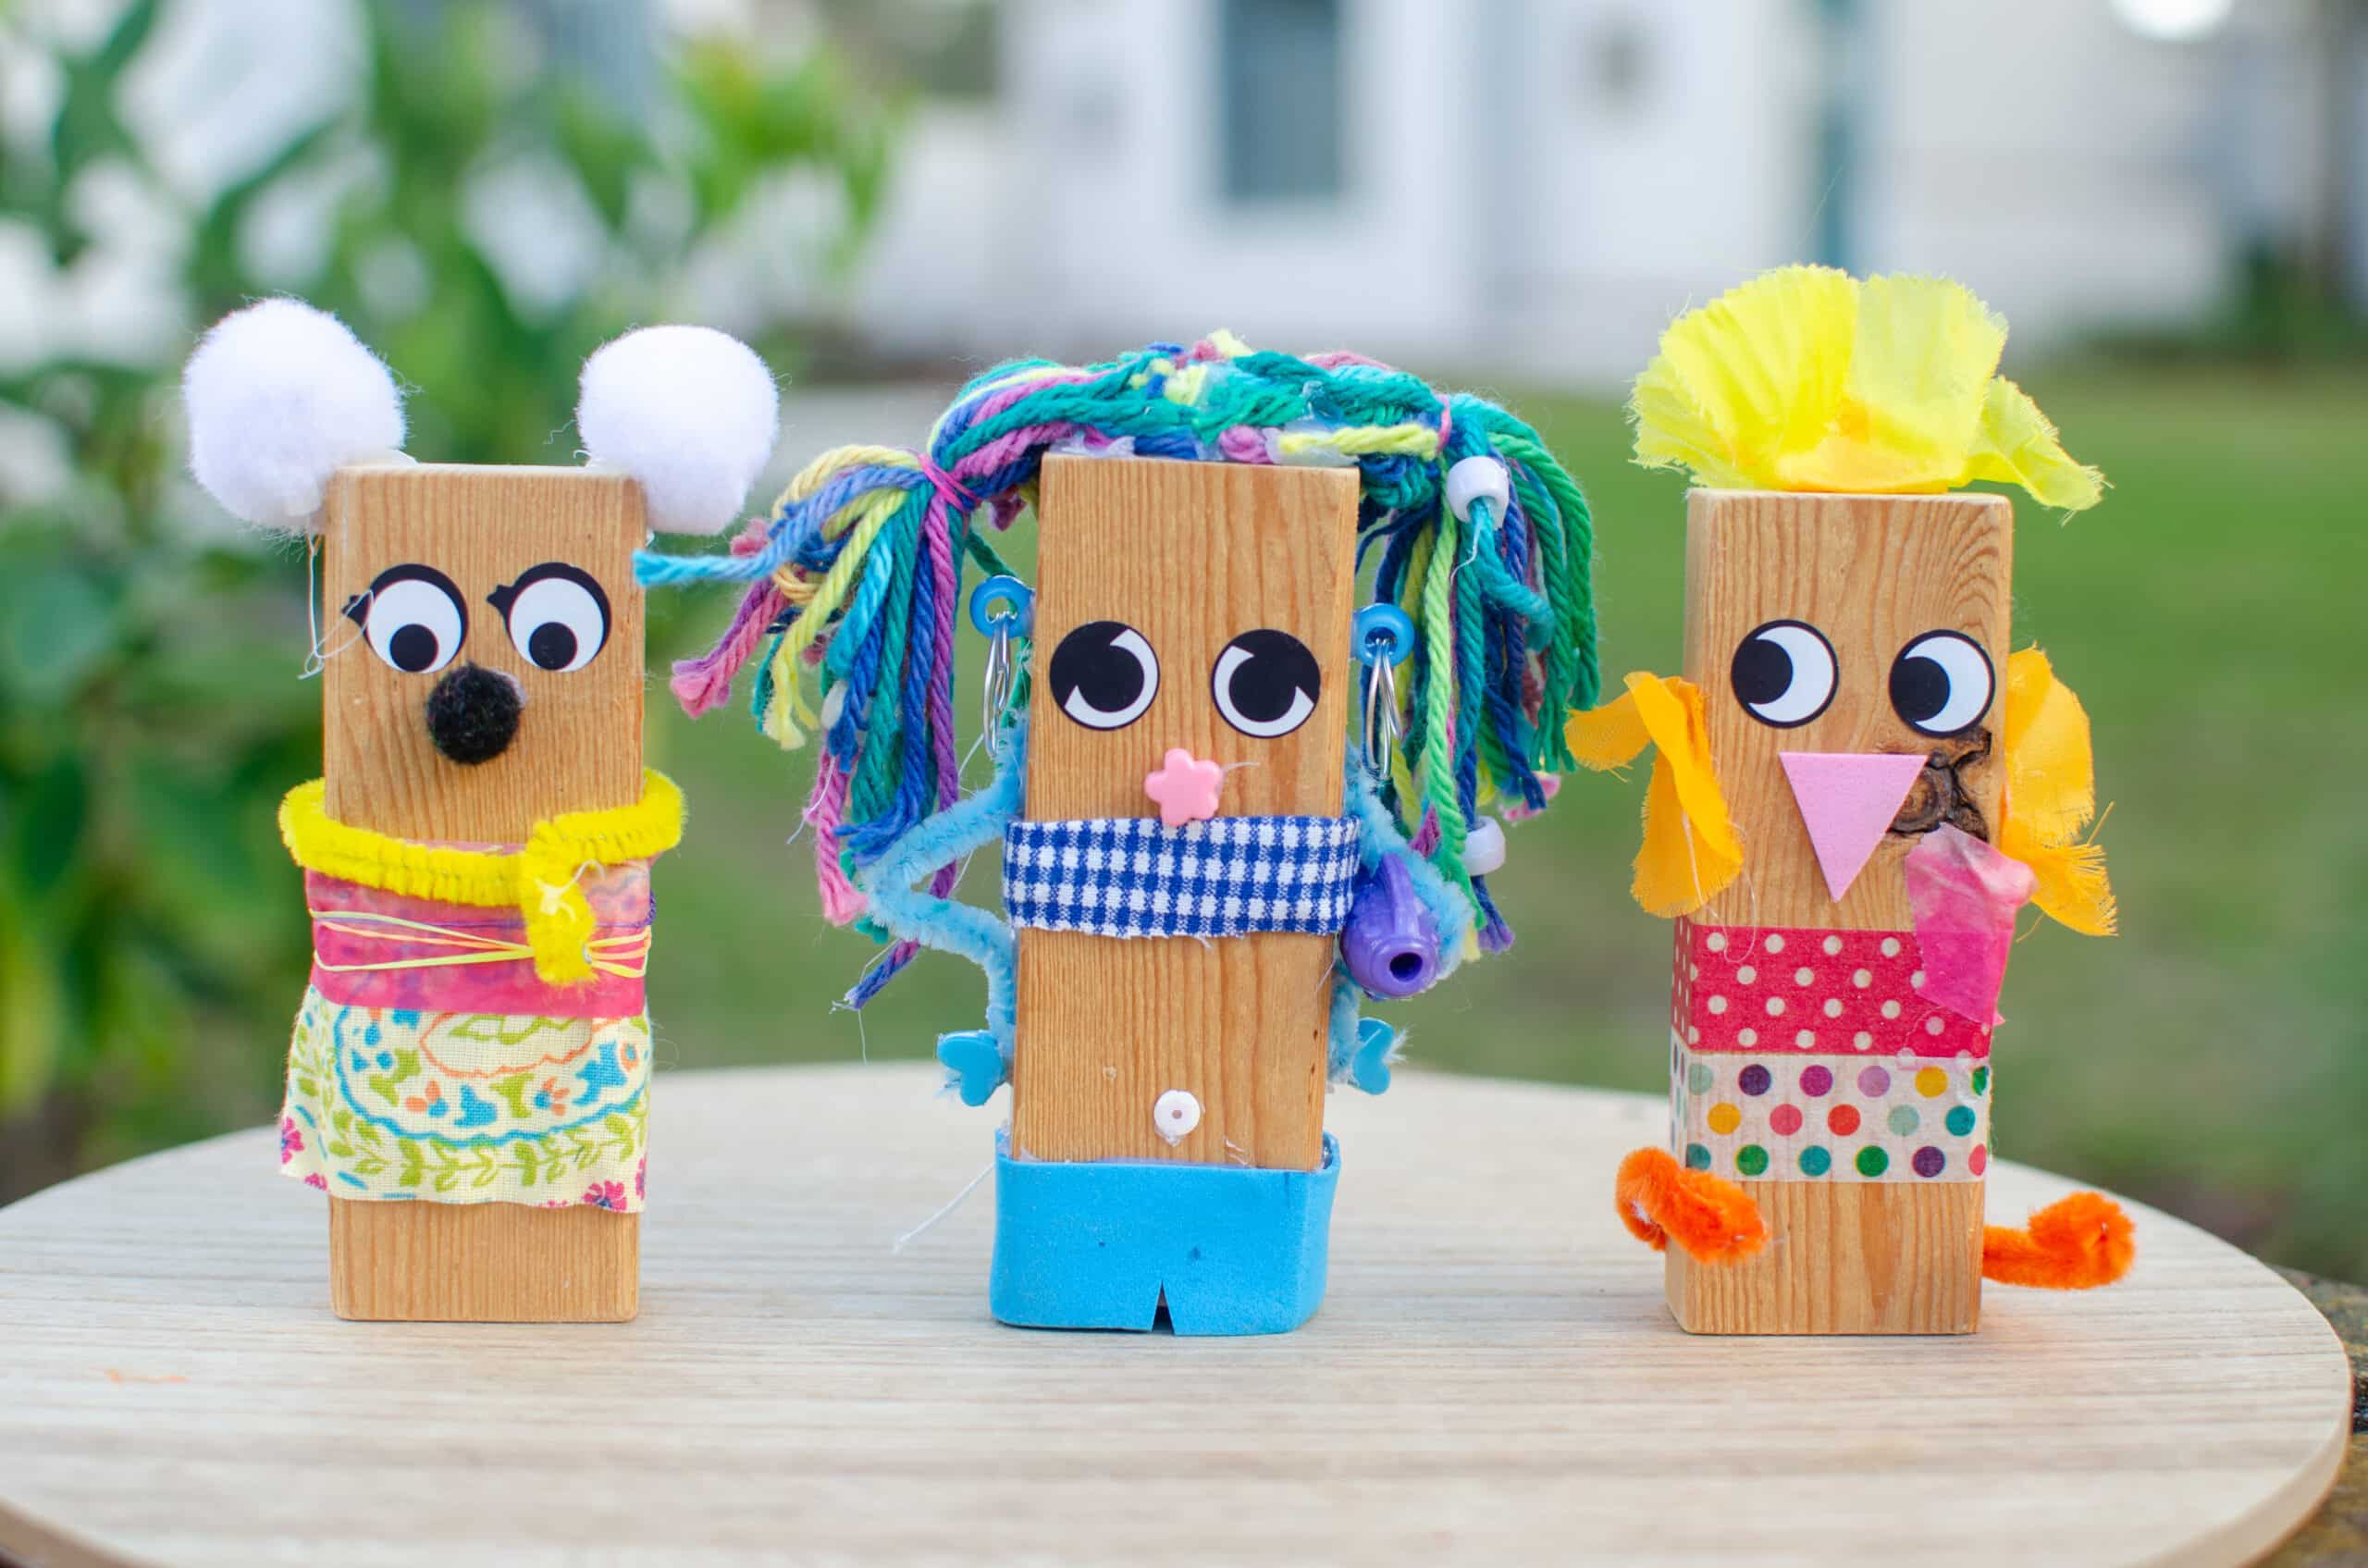 Group of three decorated wooden blocks with googly eyes, colorful pom poms, pipe cleaners, and ribbon.